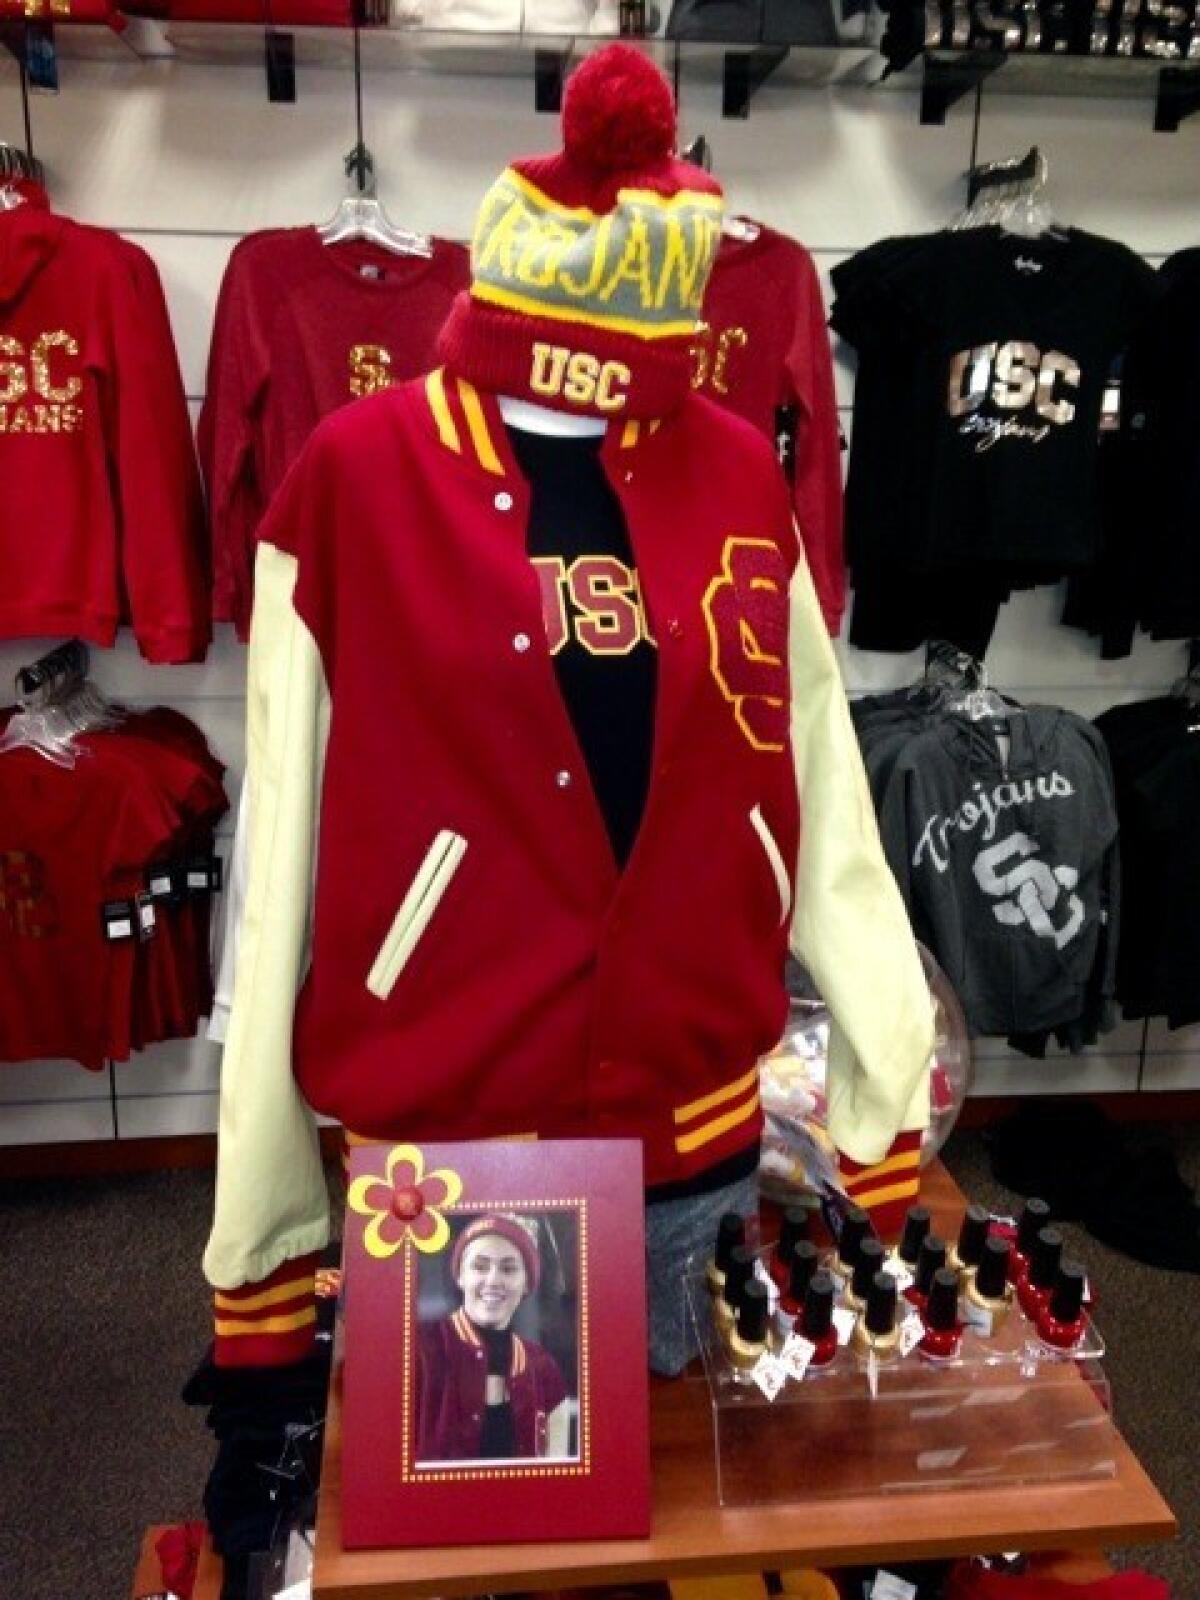 A Miley Cyrus Trojans ensemble is on sale at the USC bookstore.